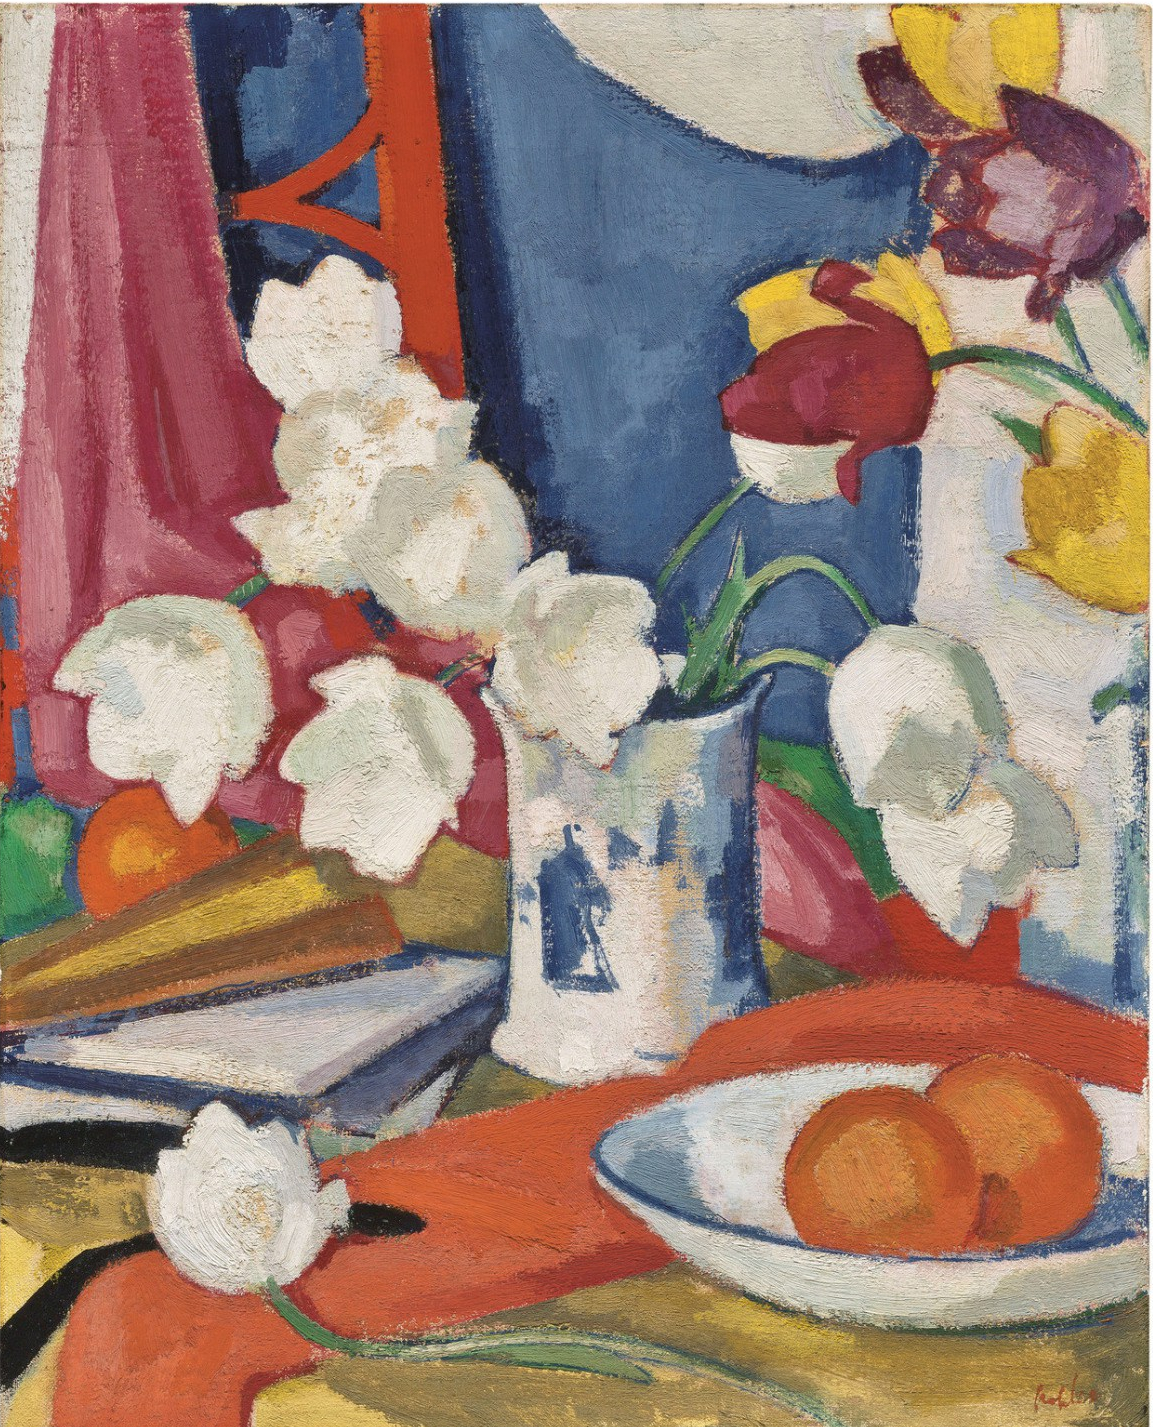 Samuel Peploe (British, 1871-1935), Red and White Tulips, early 1920s. Oil on canvas, 20 x 16 in.